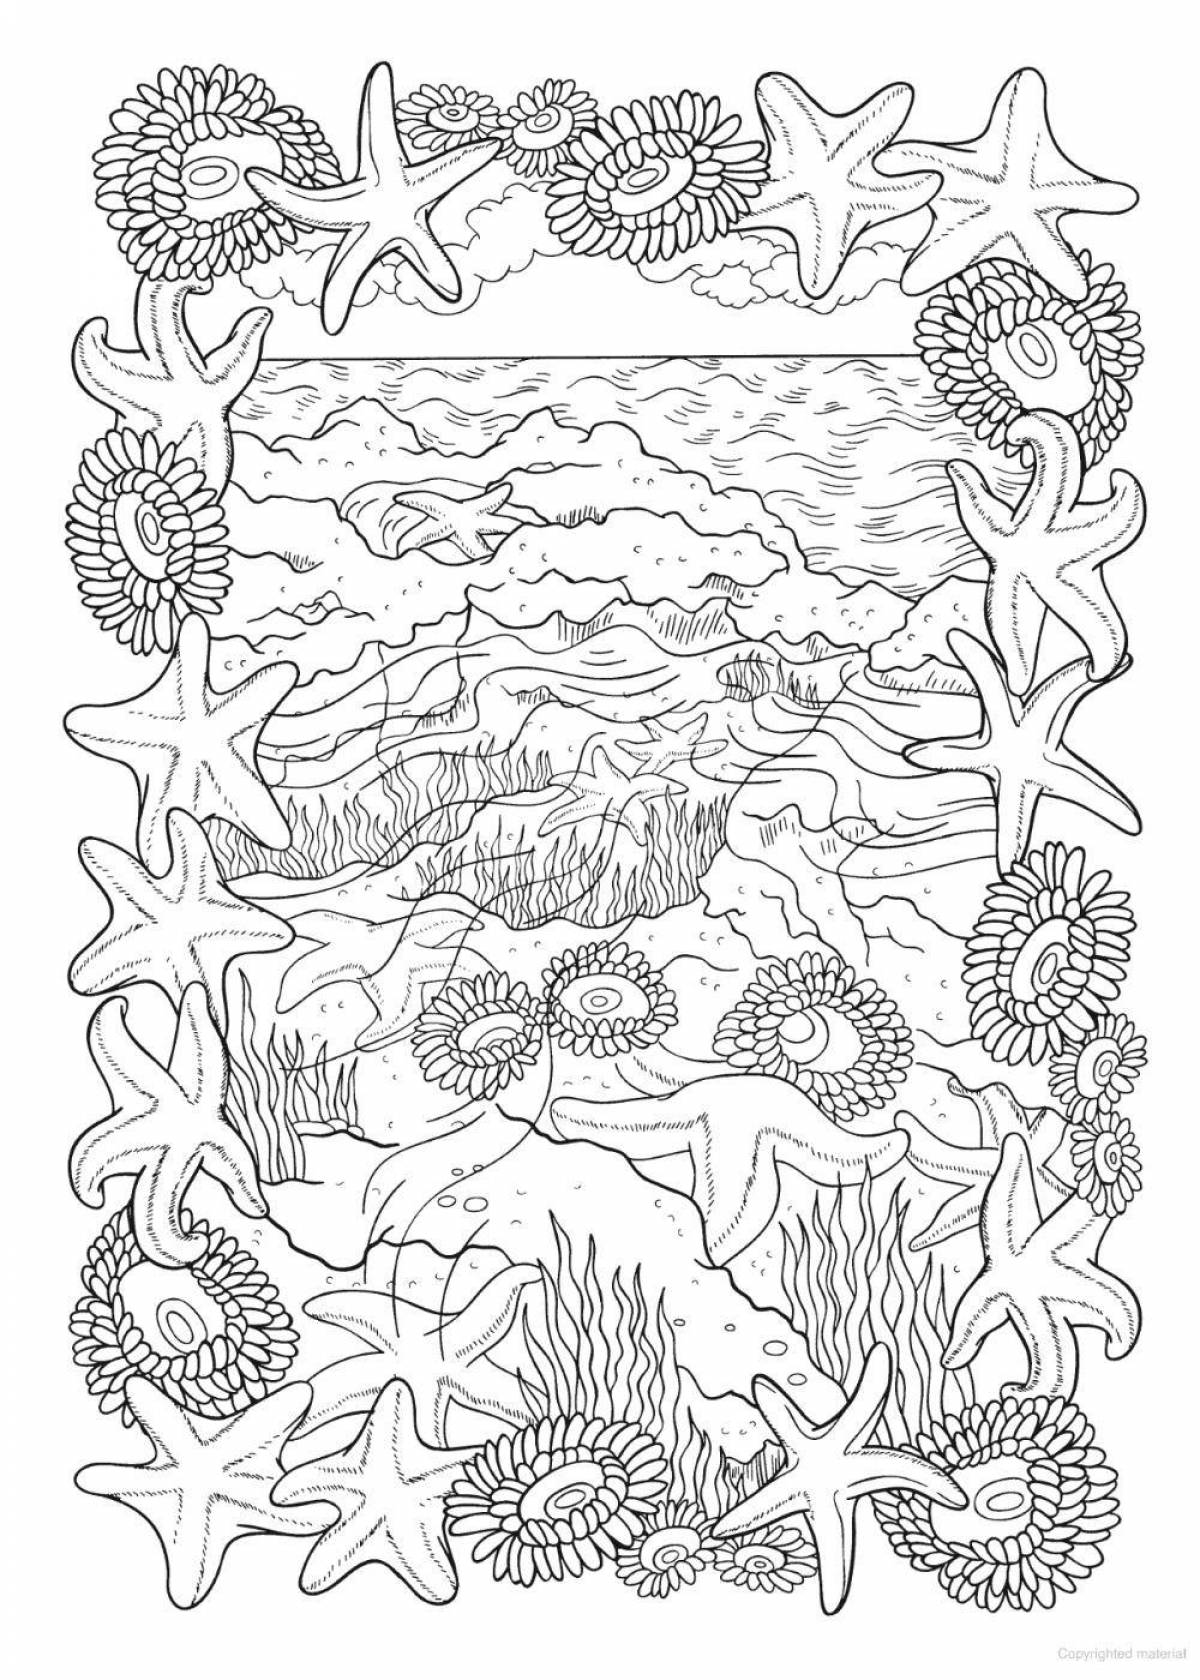 Peaceful coloring sea therapy antistress for adults polbennikova